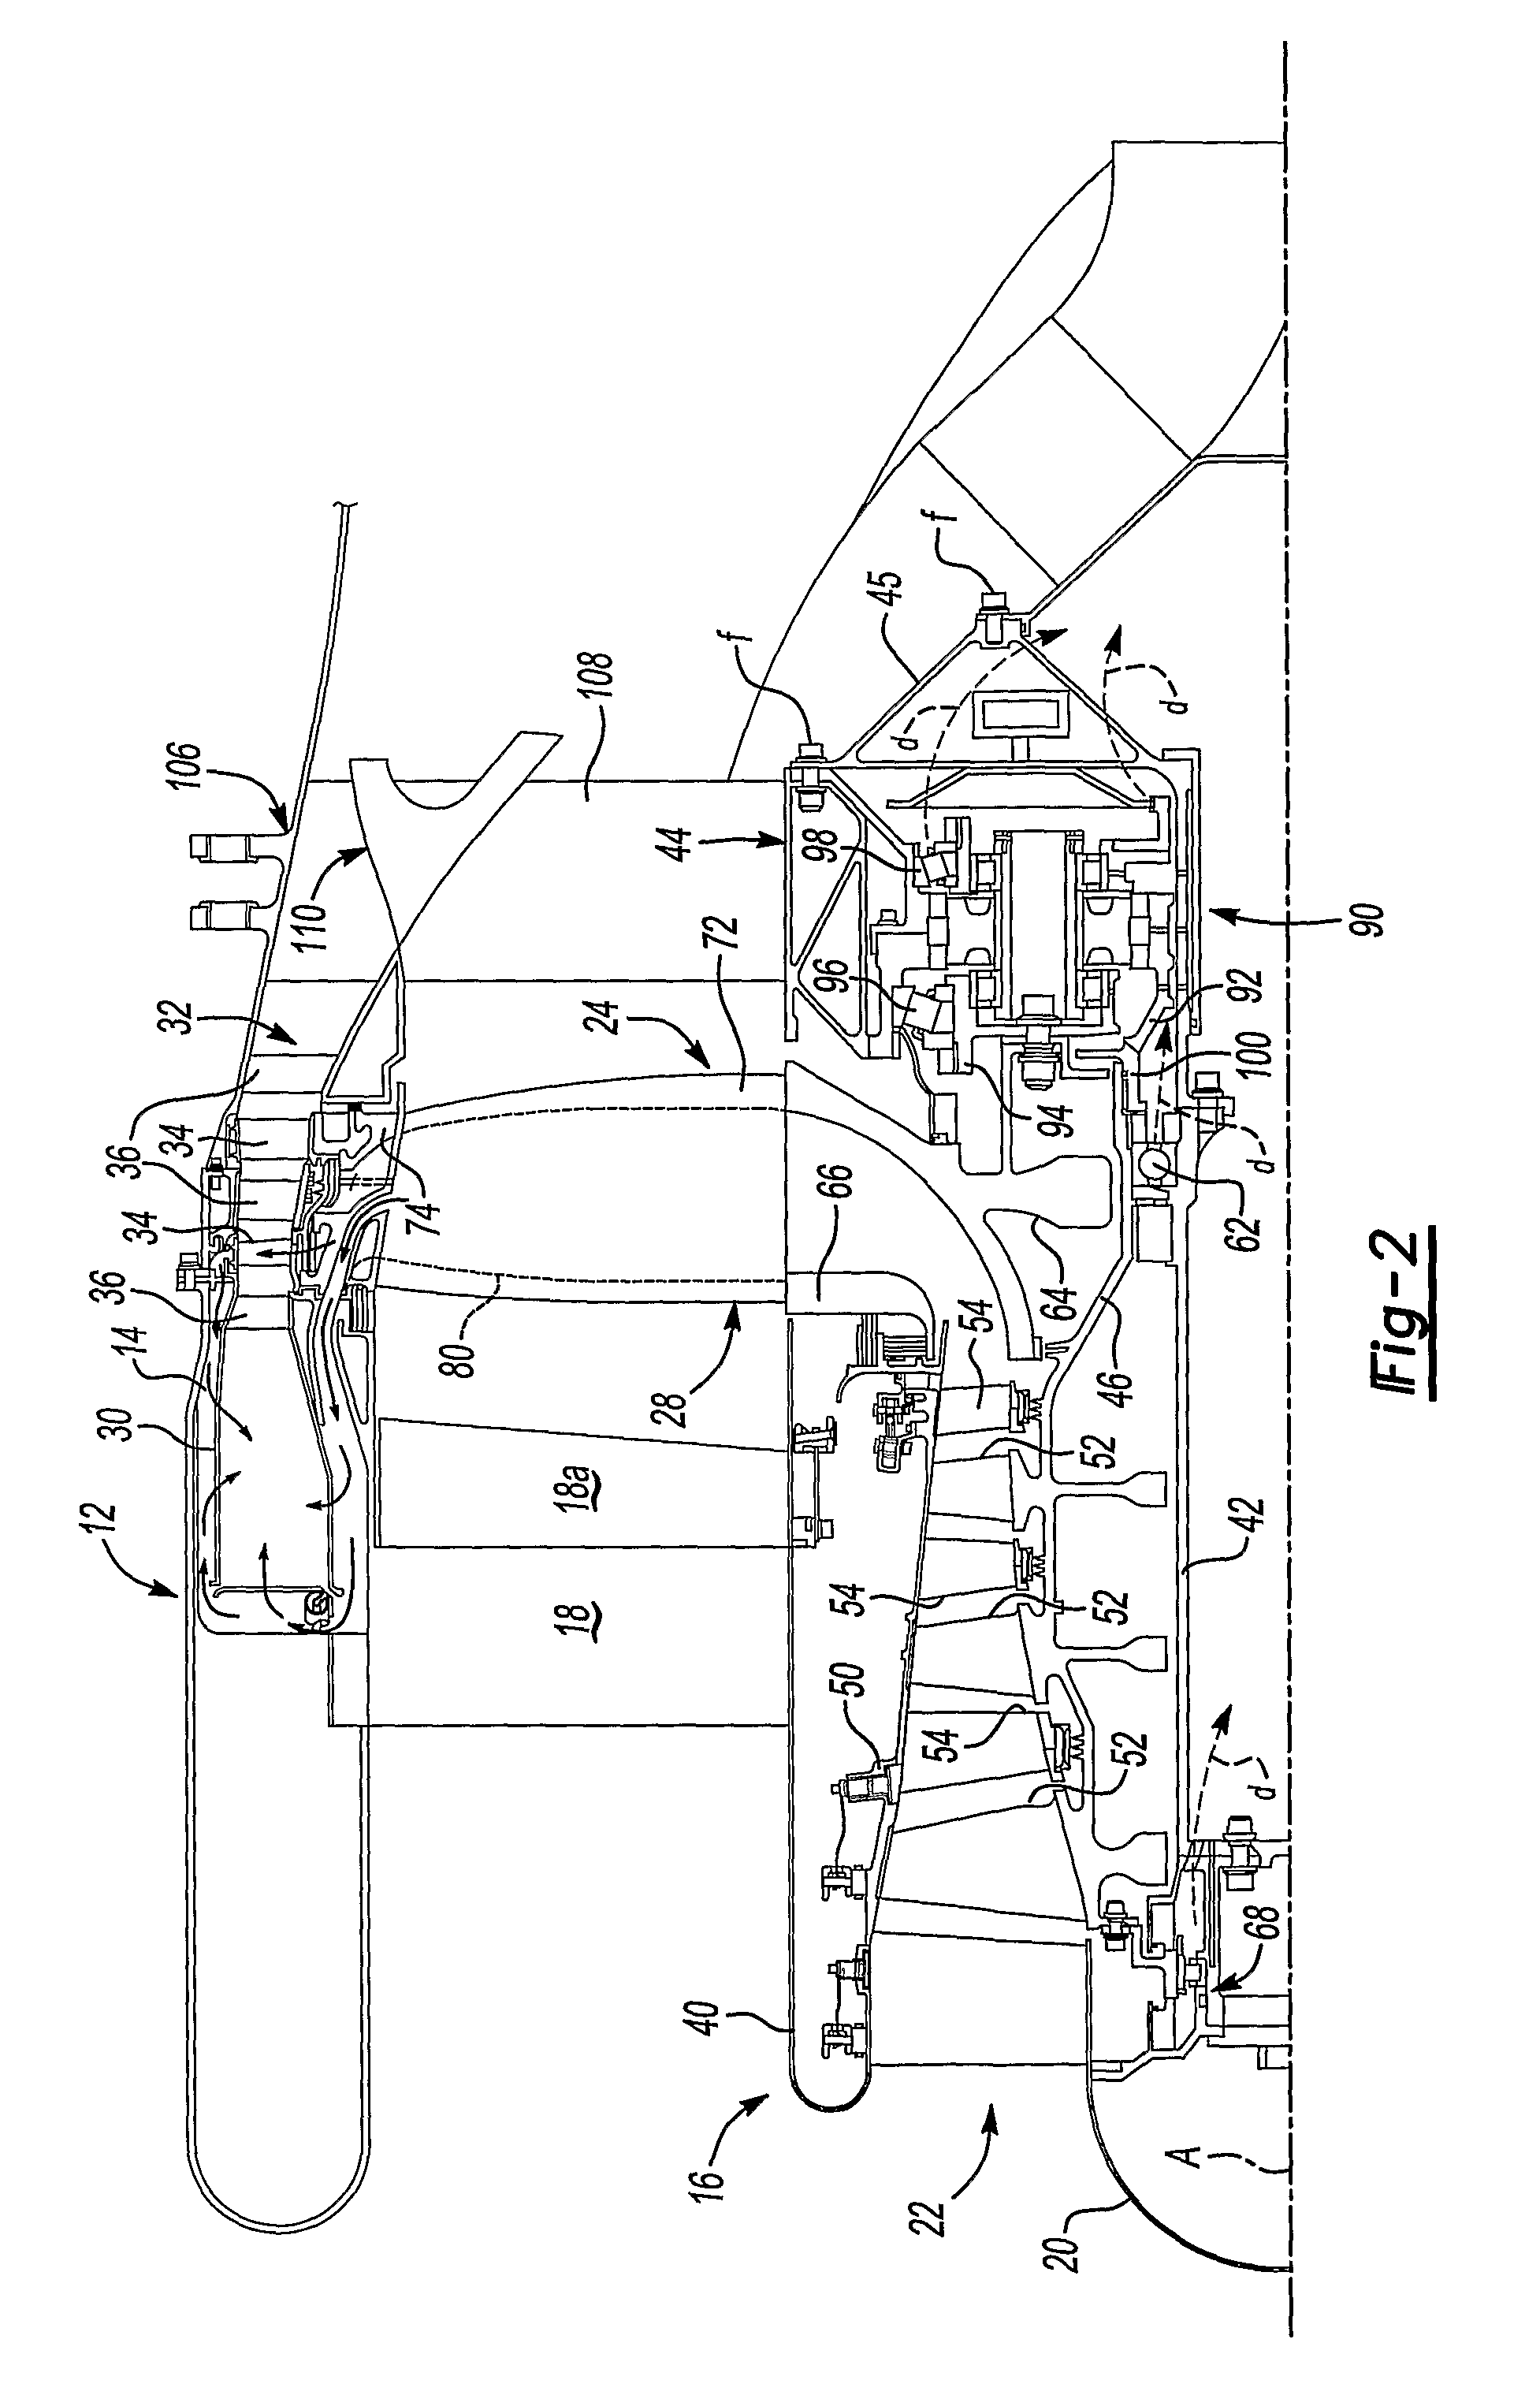 Hydraulic seal for a gearbox of a tip turbine engine